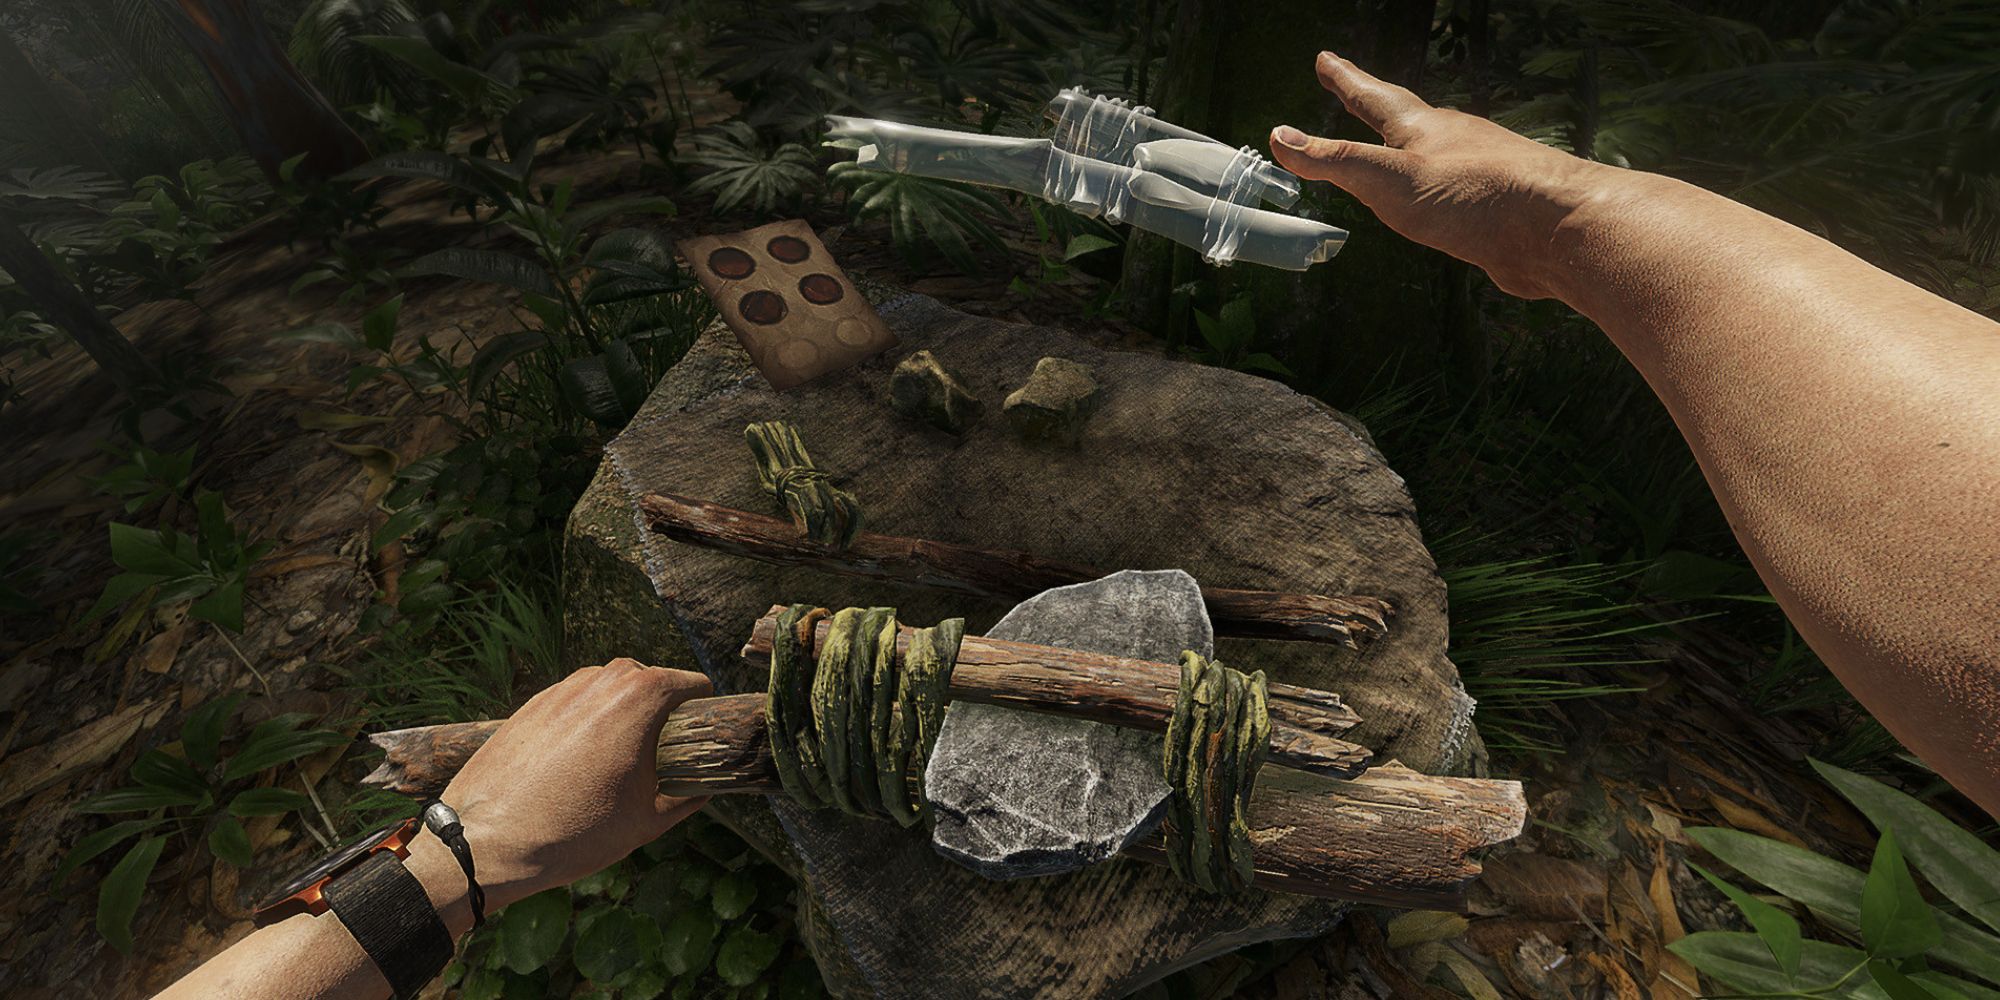 Crafting tools in the jungle in Green Hell VR Mode